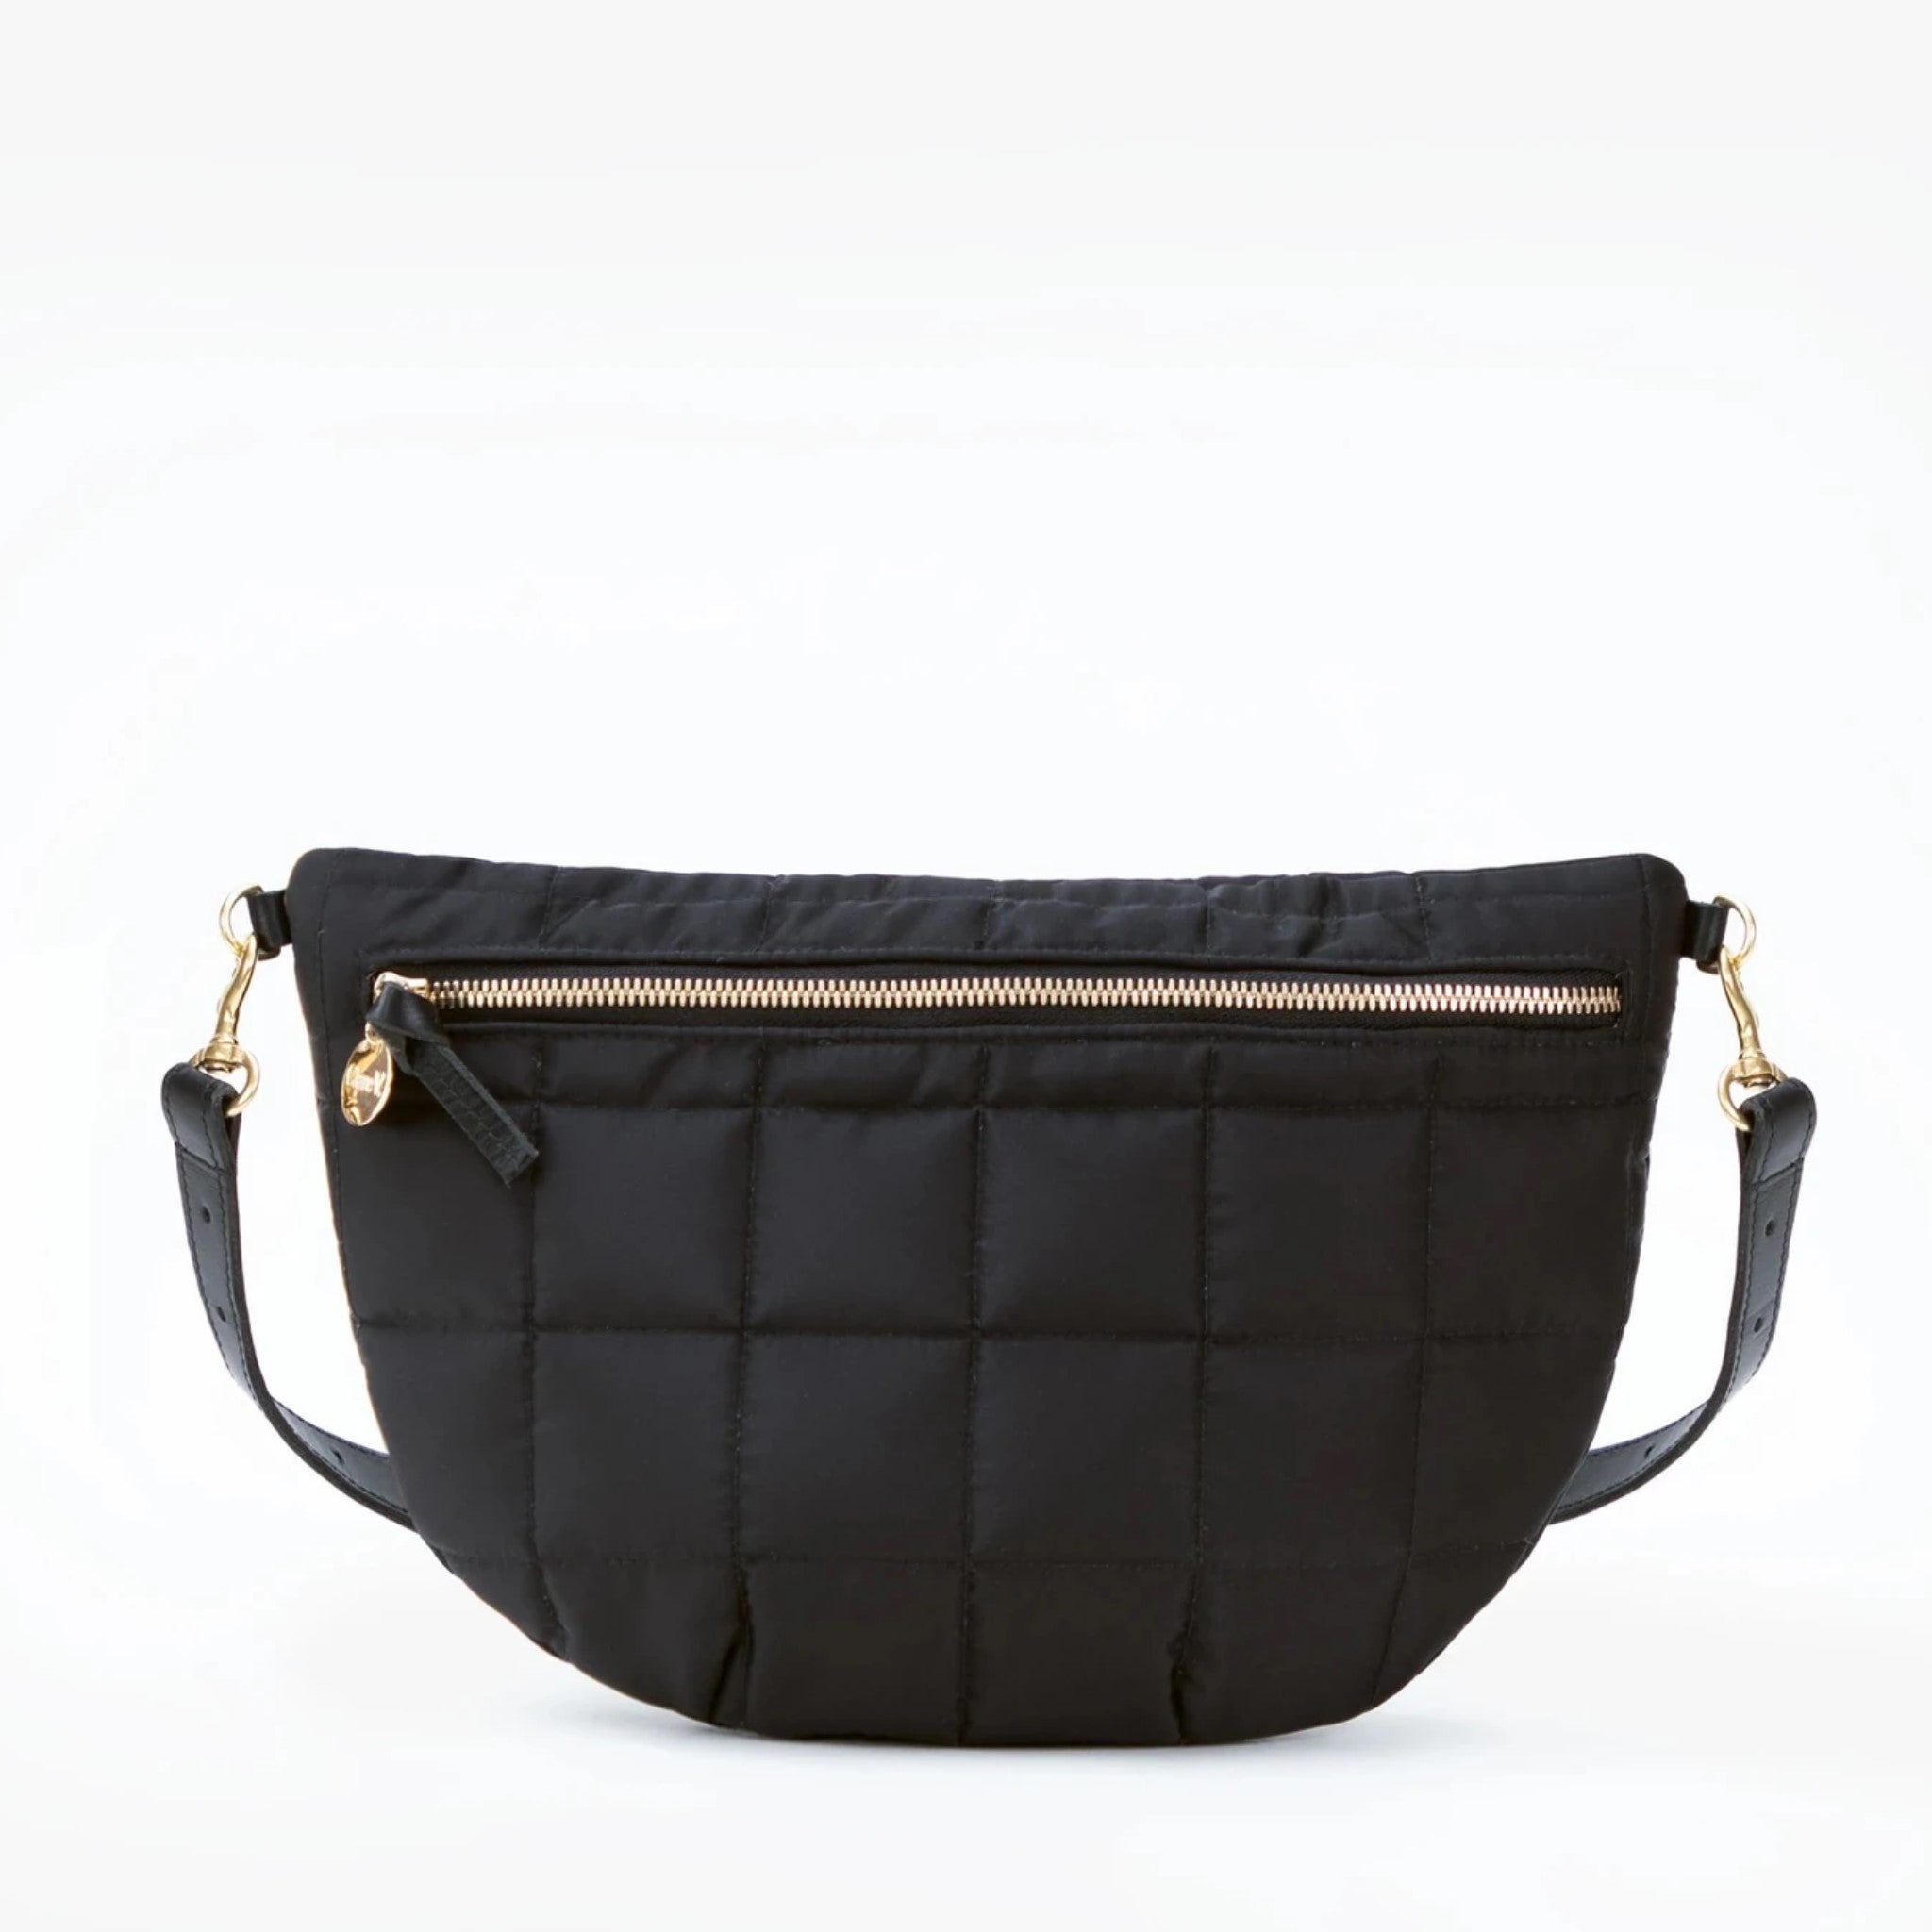 Clare V. - Messenger Bag in Black Quilted Puffer